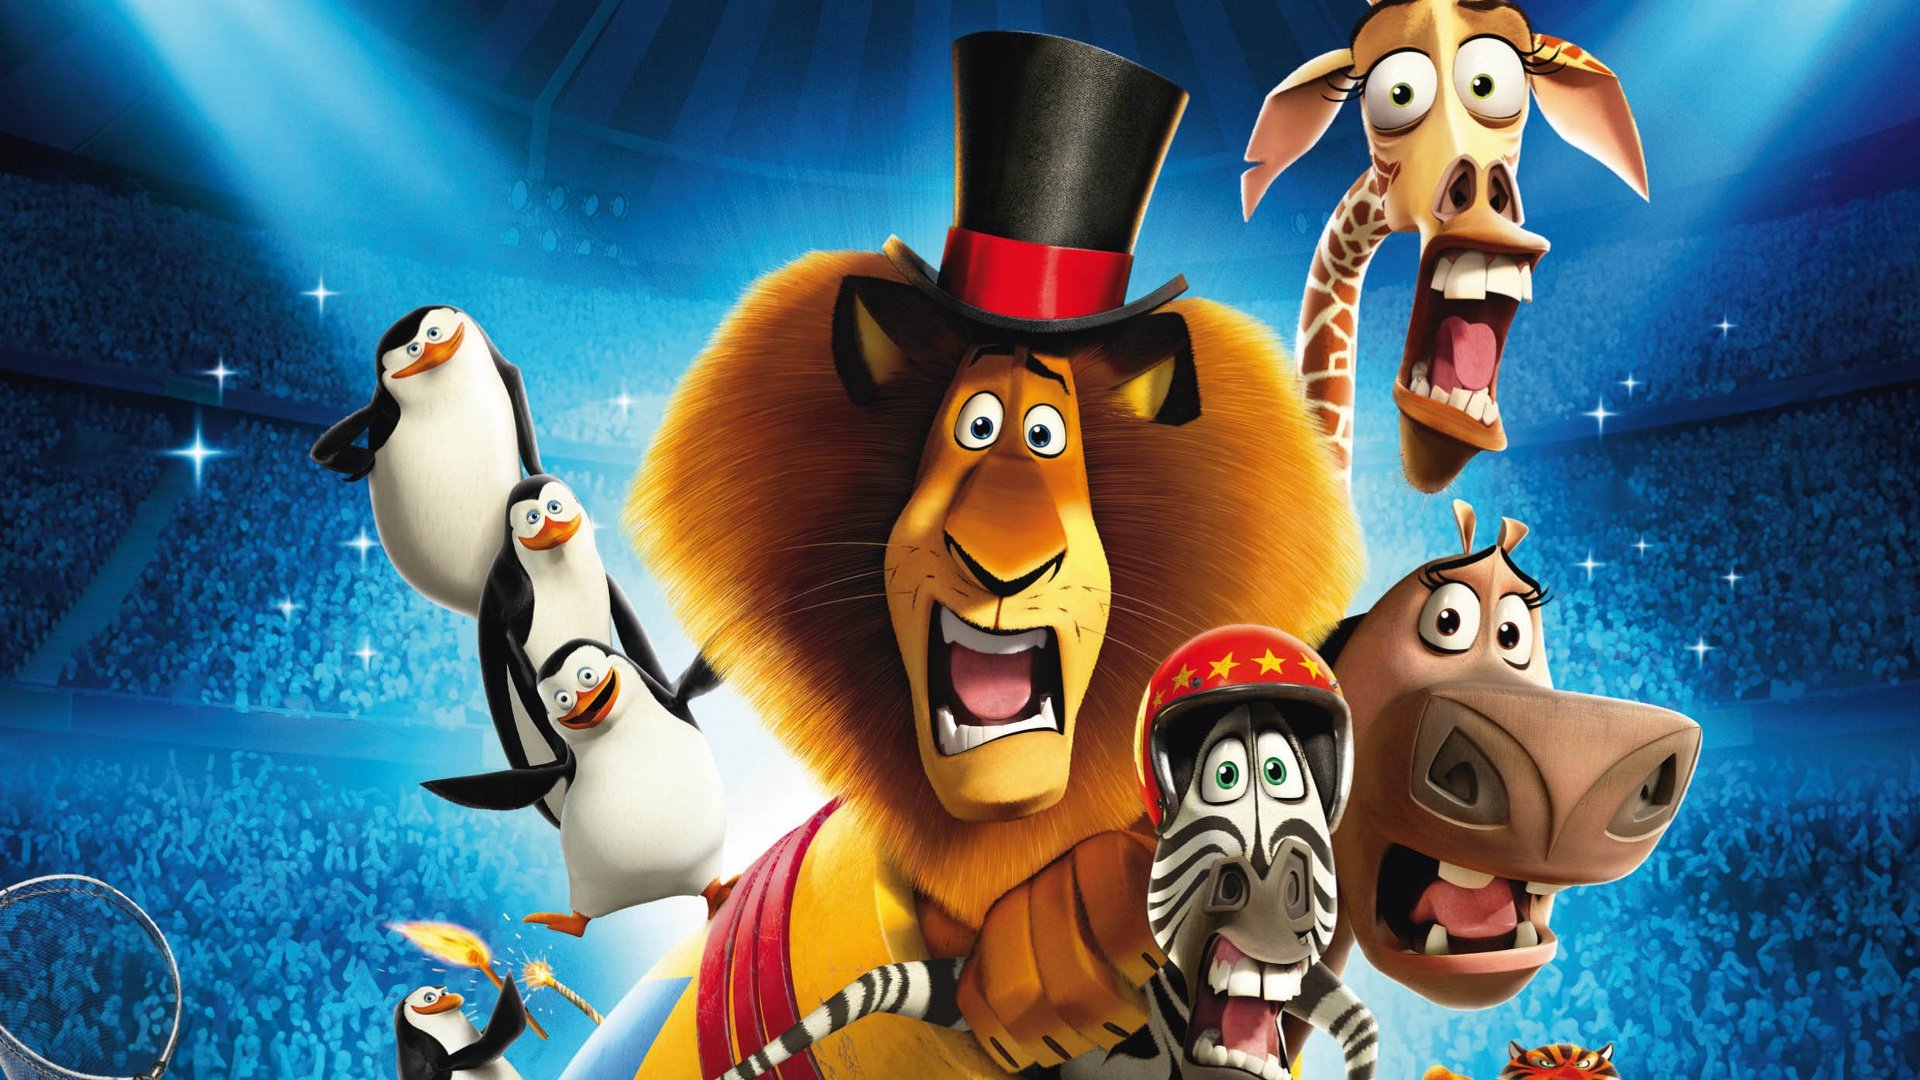 Best Madagascar 3: Europe's Most Wanted wallpaper ID:451720 for High Resolution 1080p computer